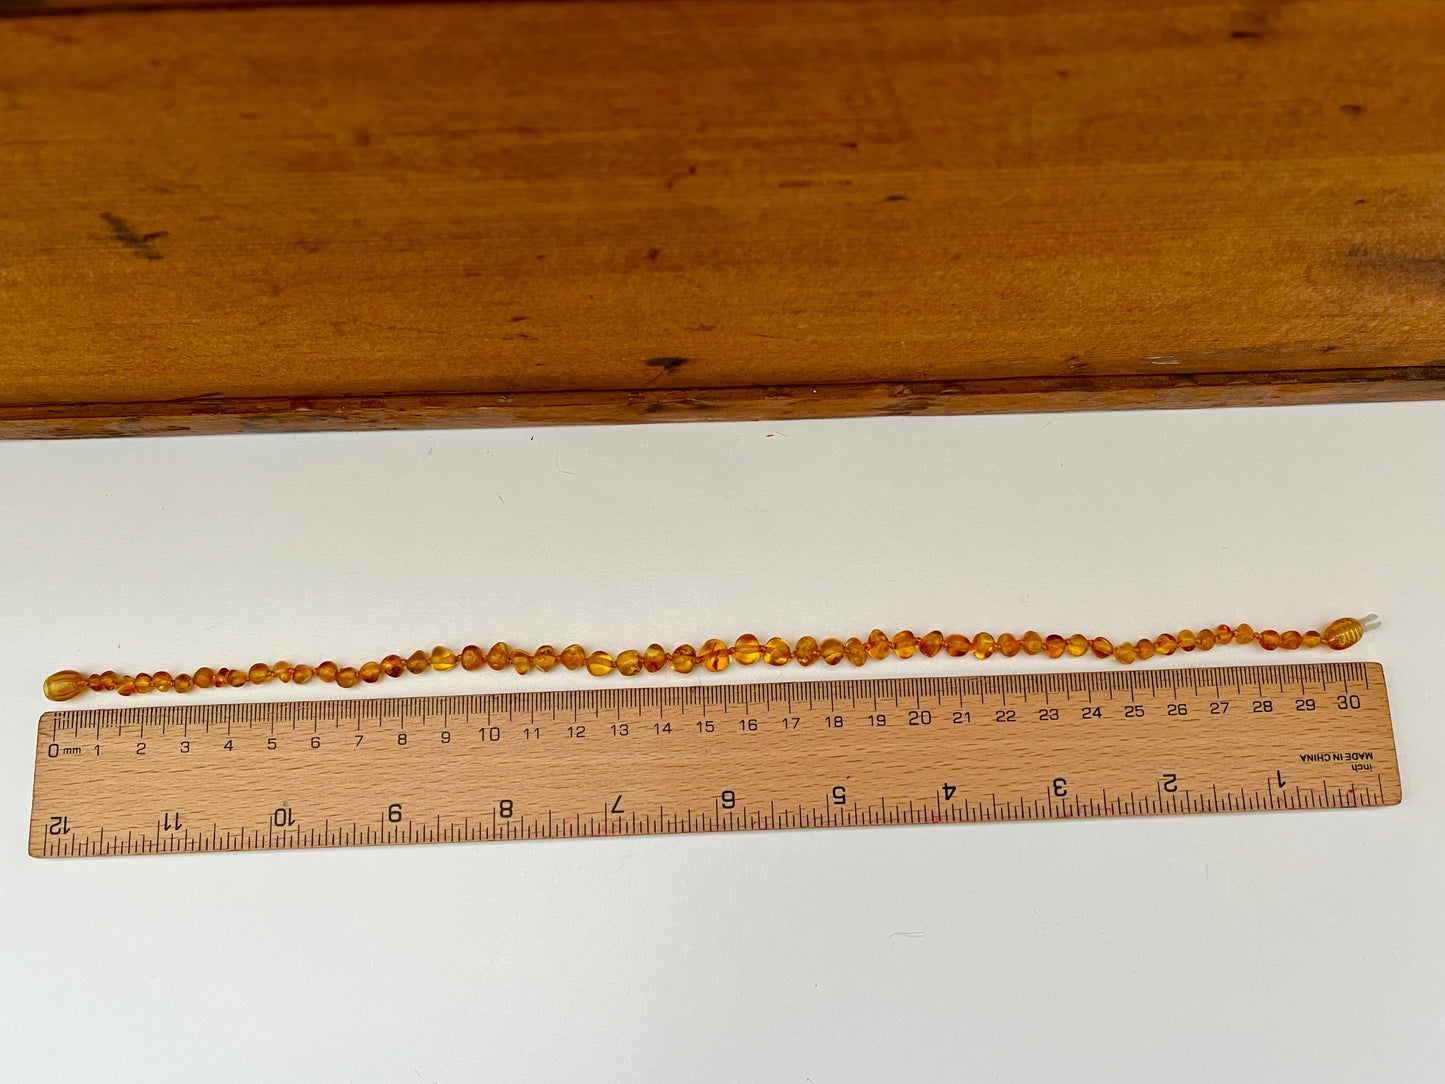 AMBER NECKLACE - for Baby, or young child, 2 choices!